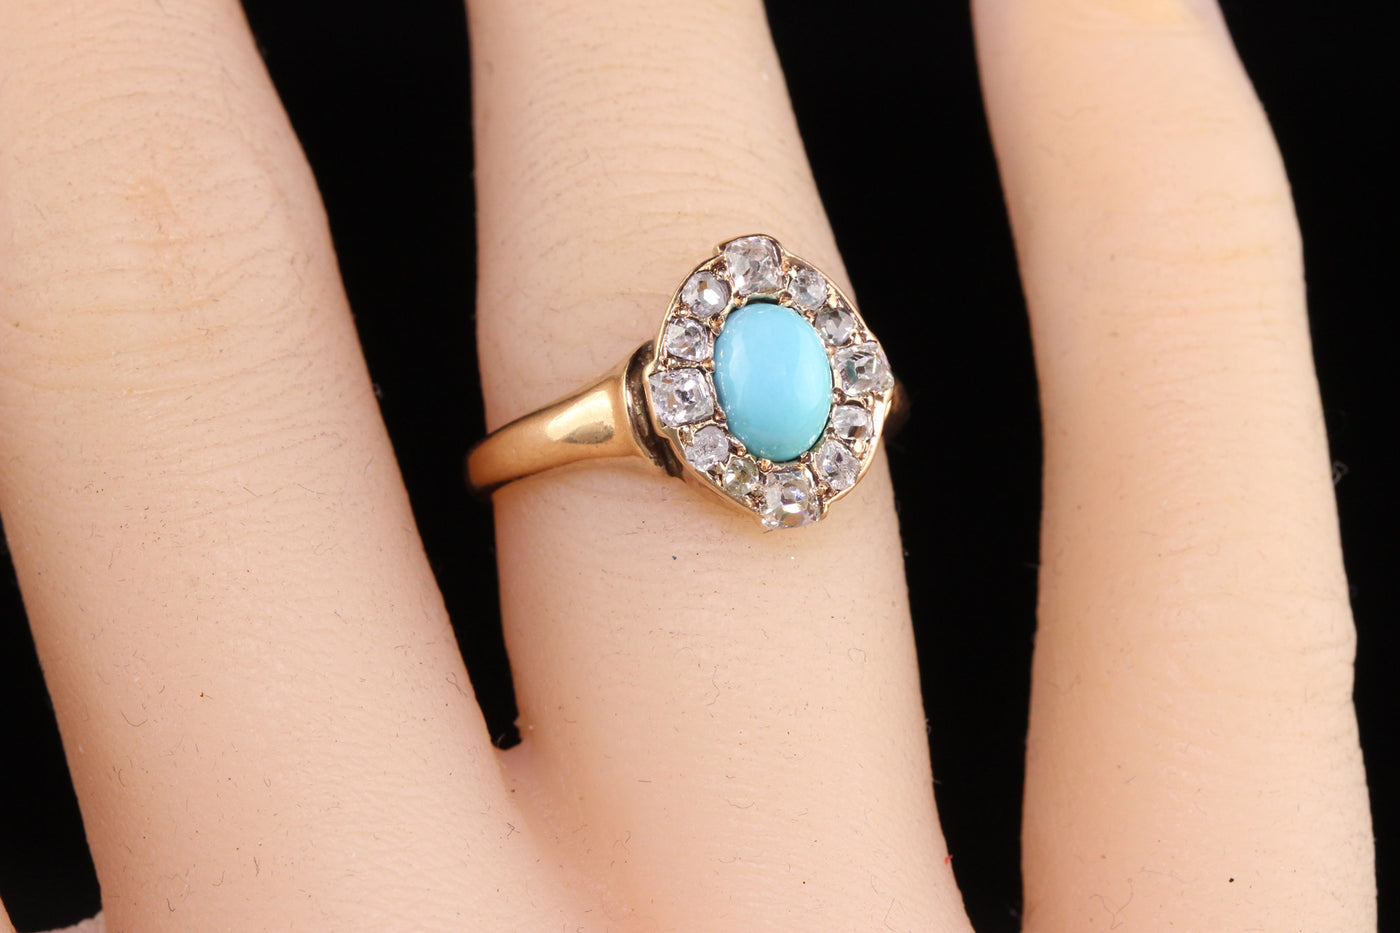 Antique Victorian 14K Yellow Gold Cabochon Turquoise Old Mine Cut Diamond Ring